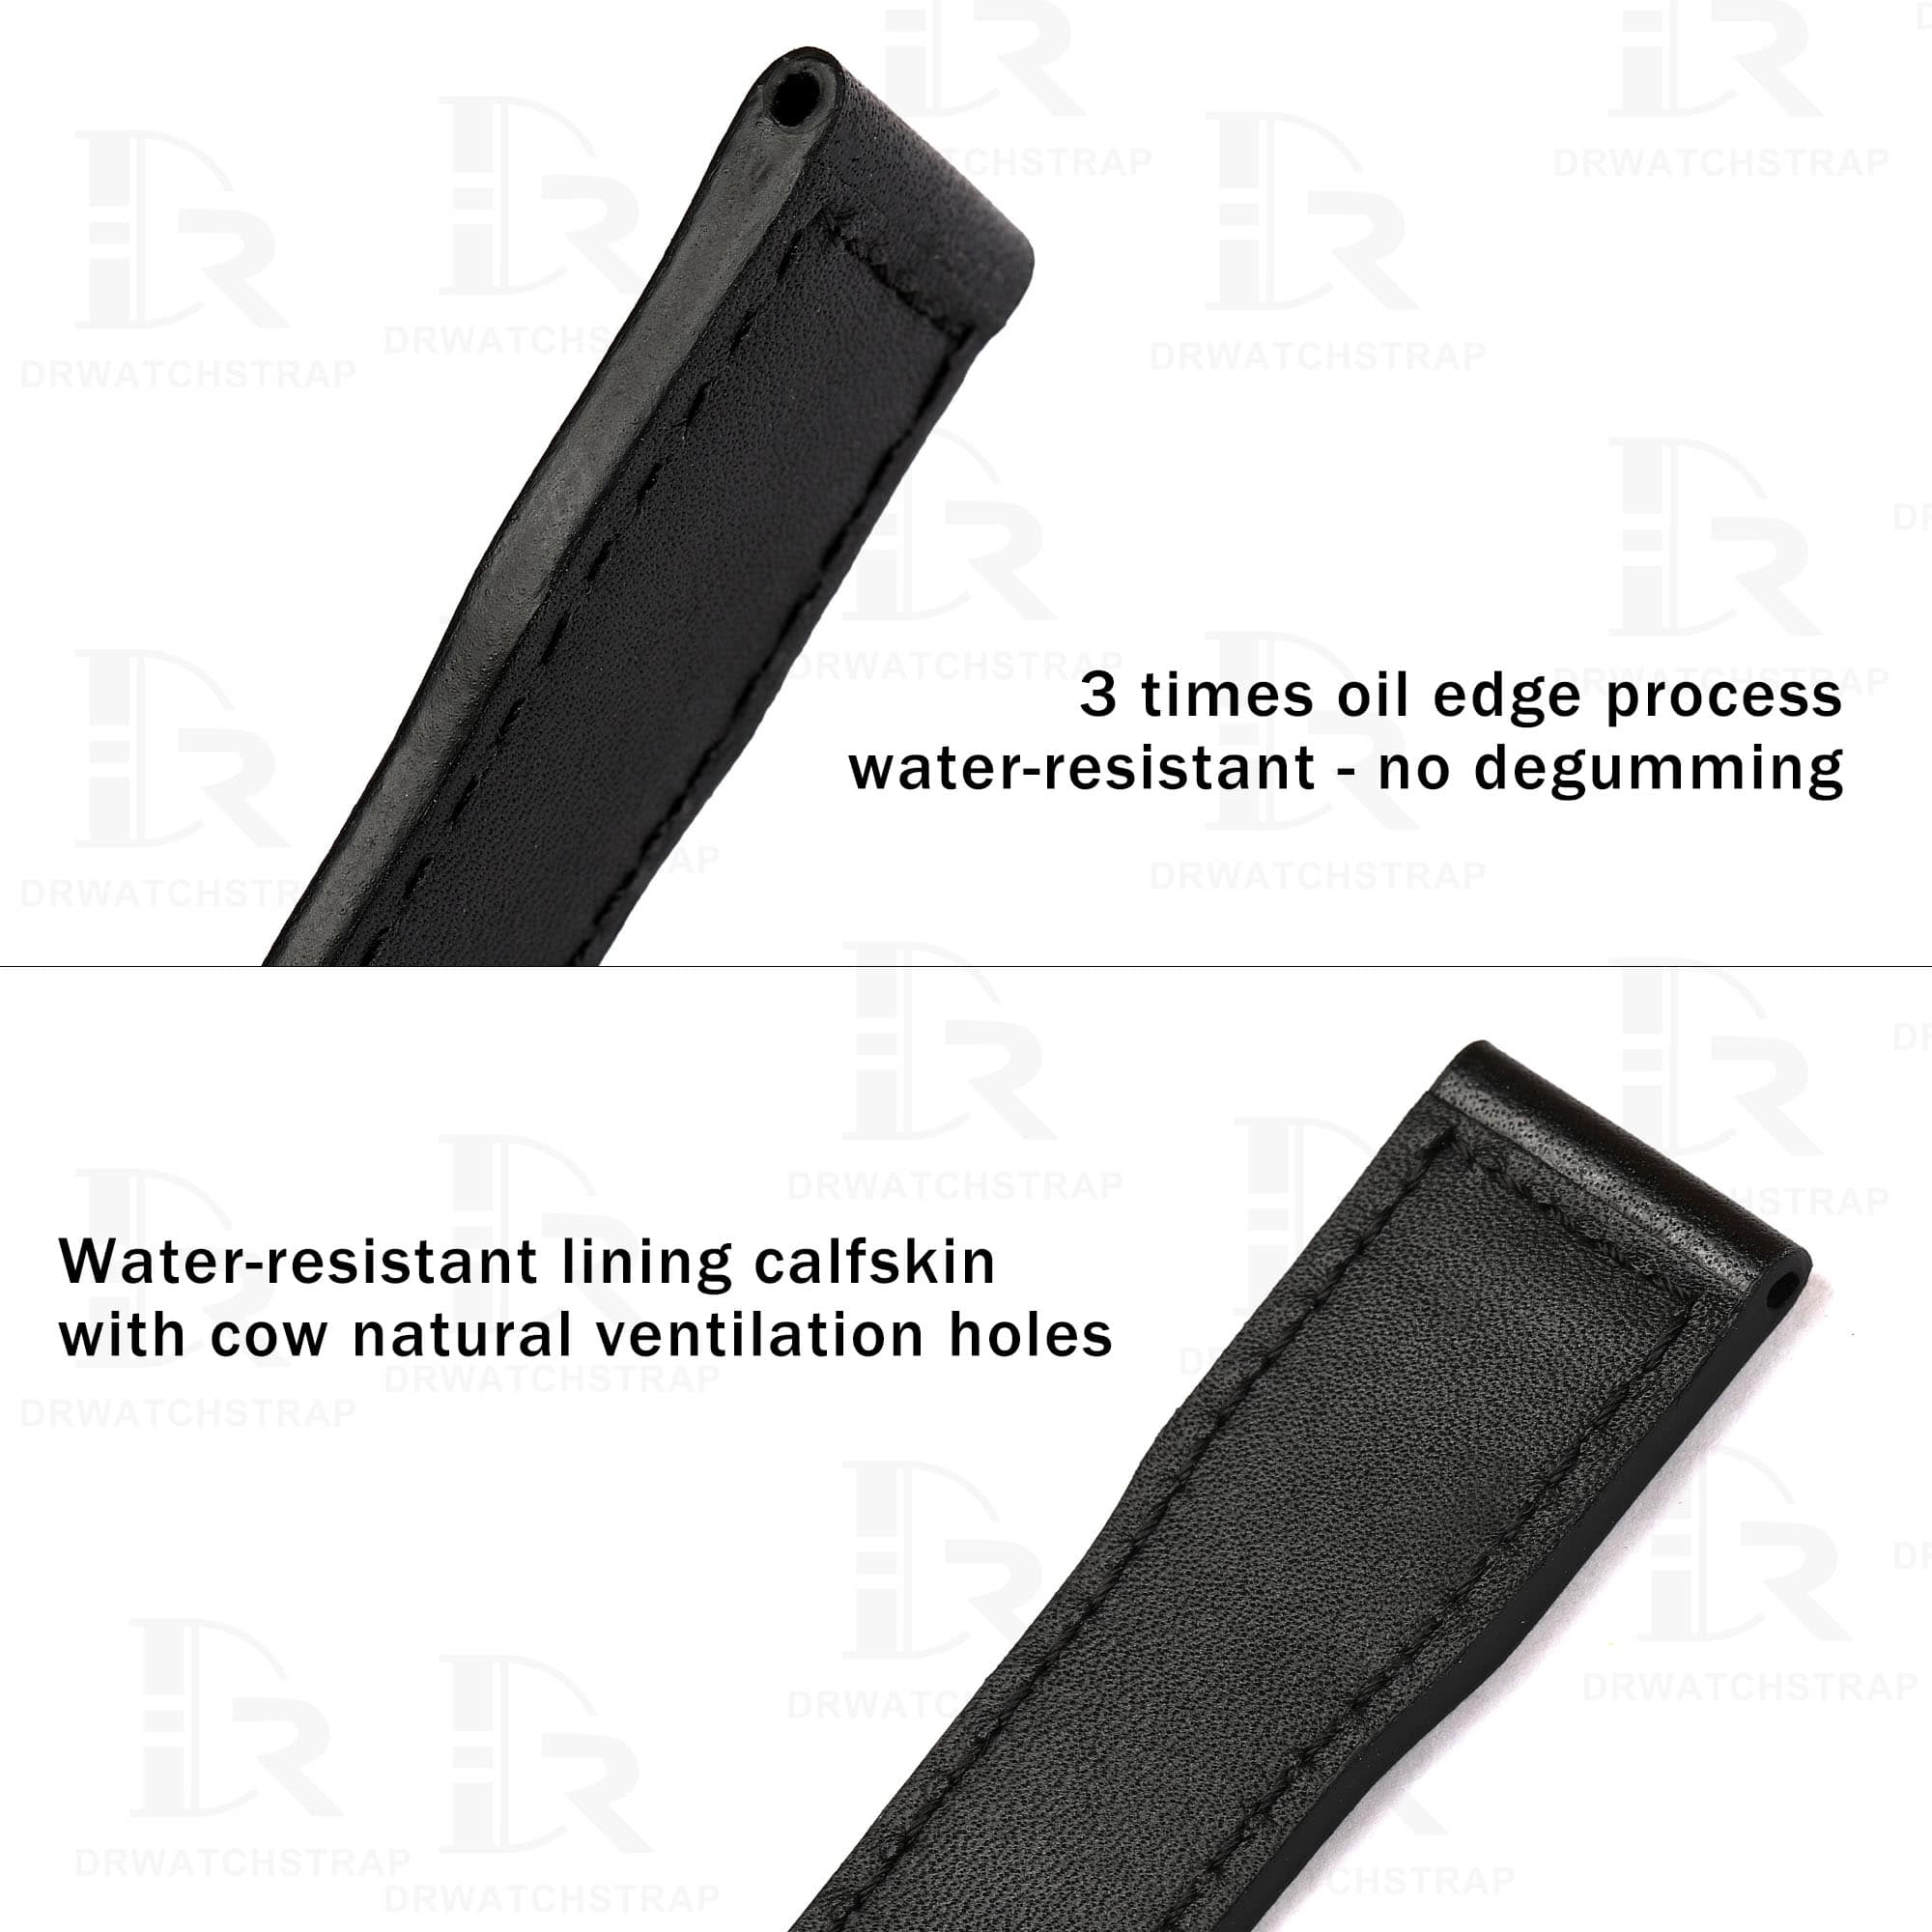 Premium Water-resistant calf linning buttom leather and 3 times oil edge